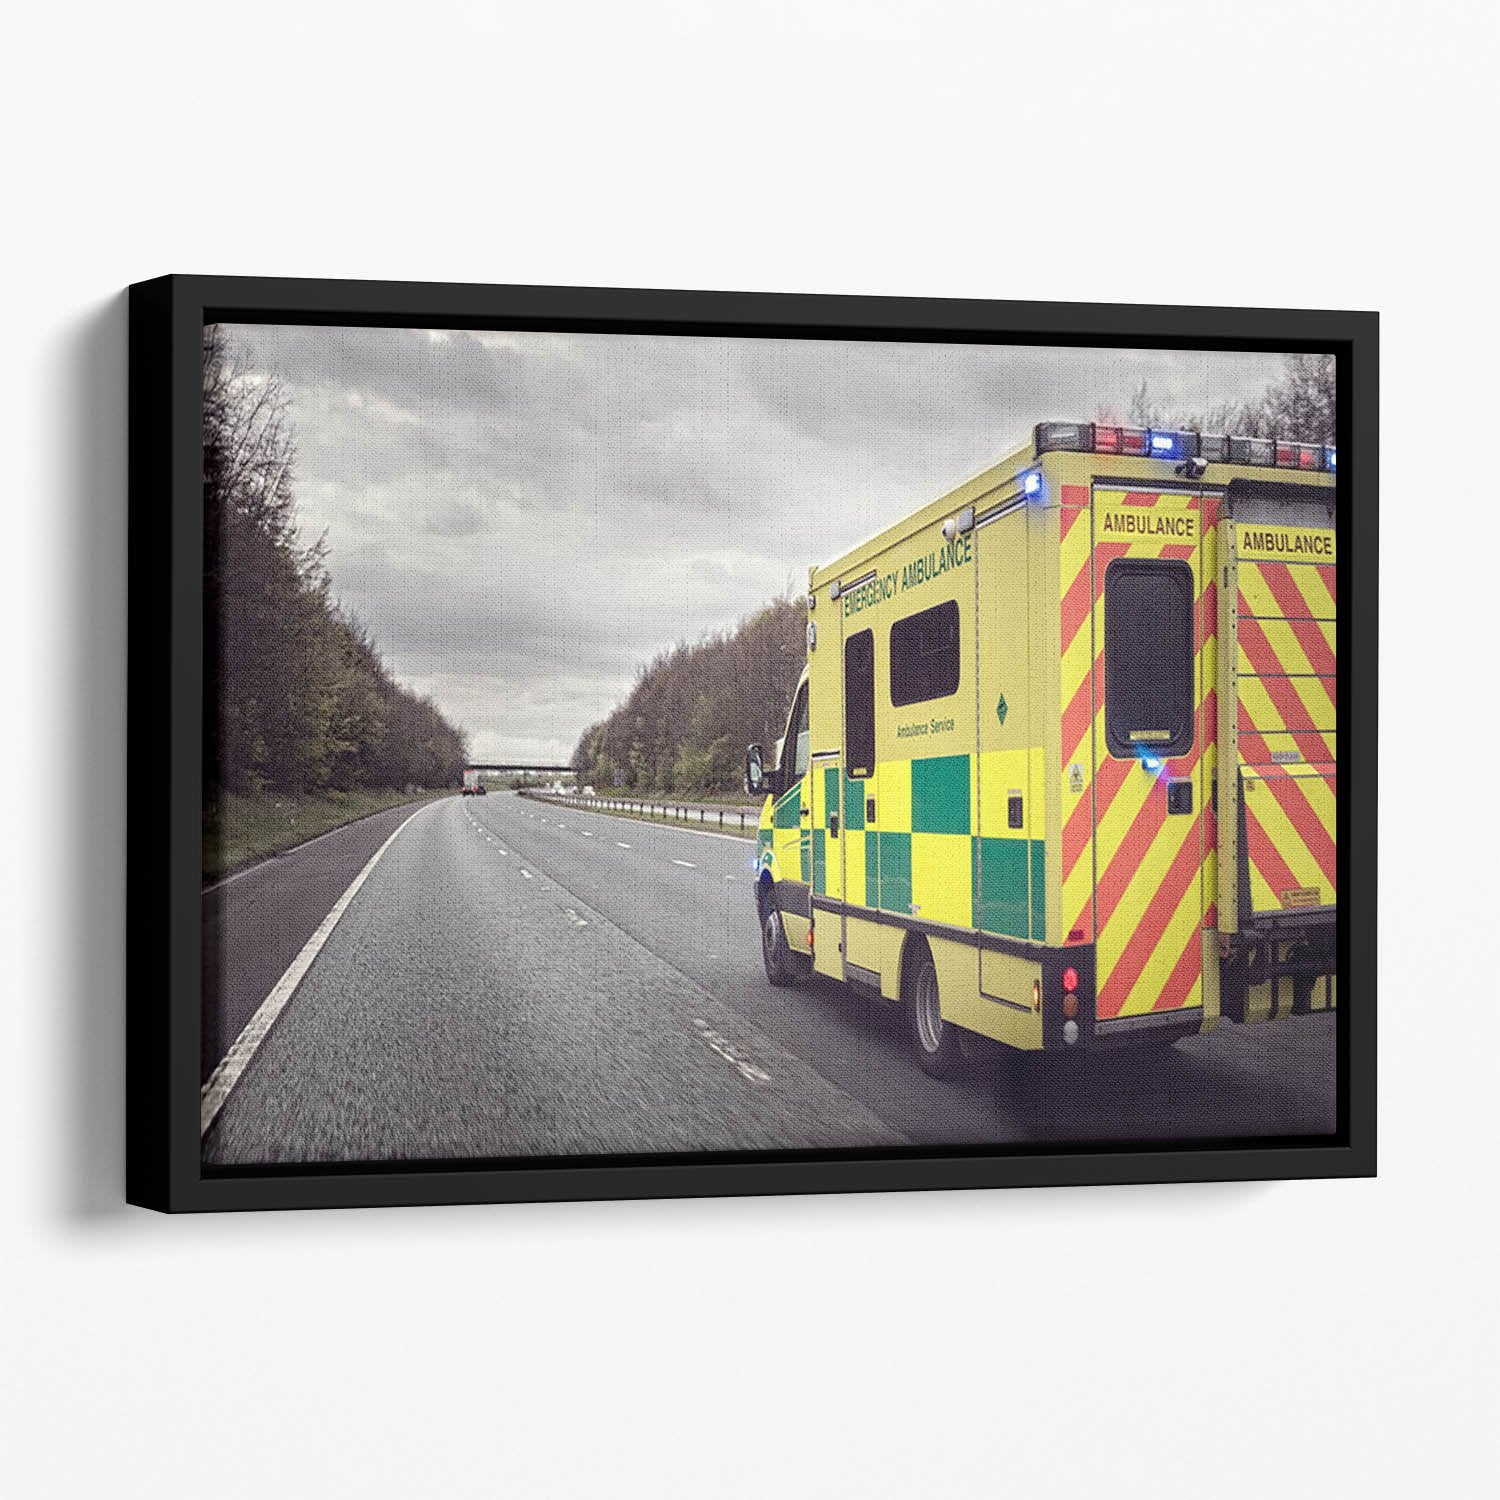 Ambulance responding to an emergency Floating Framed Canvas